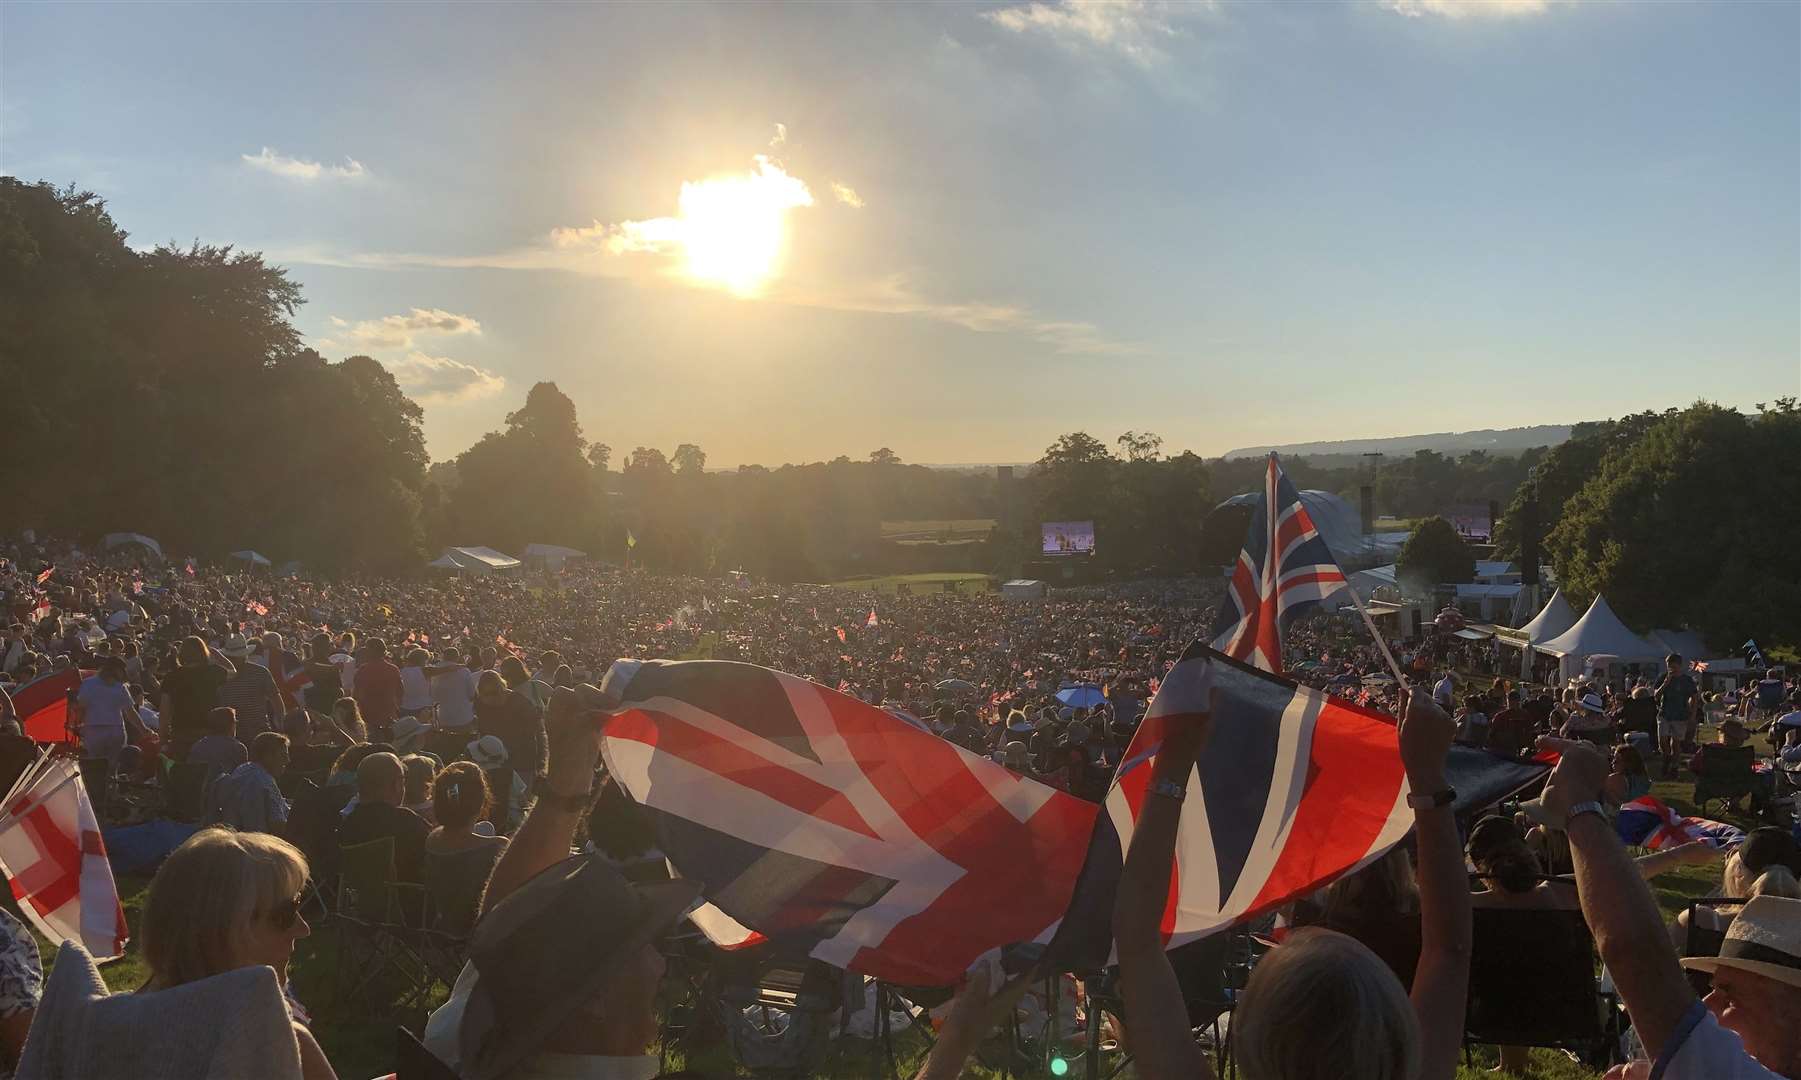 Most of the audience wore floppy hats and sunglasses at the Leeds Castle concert last night